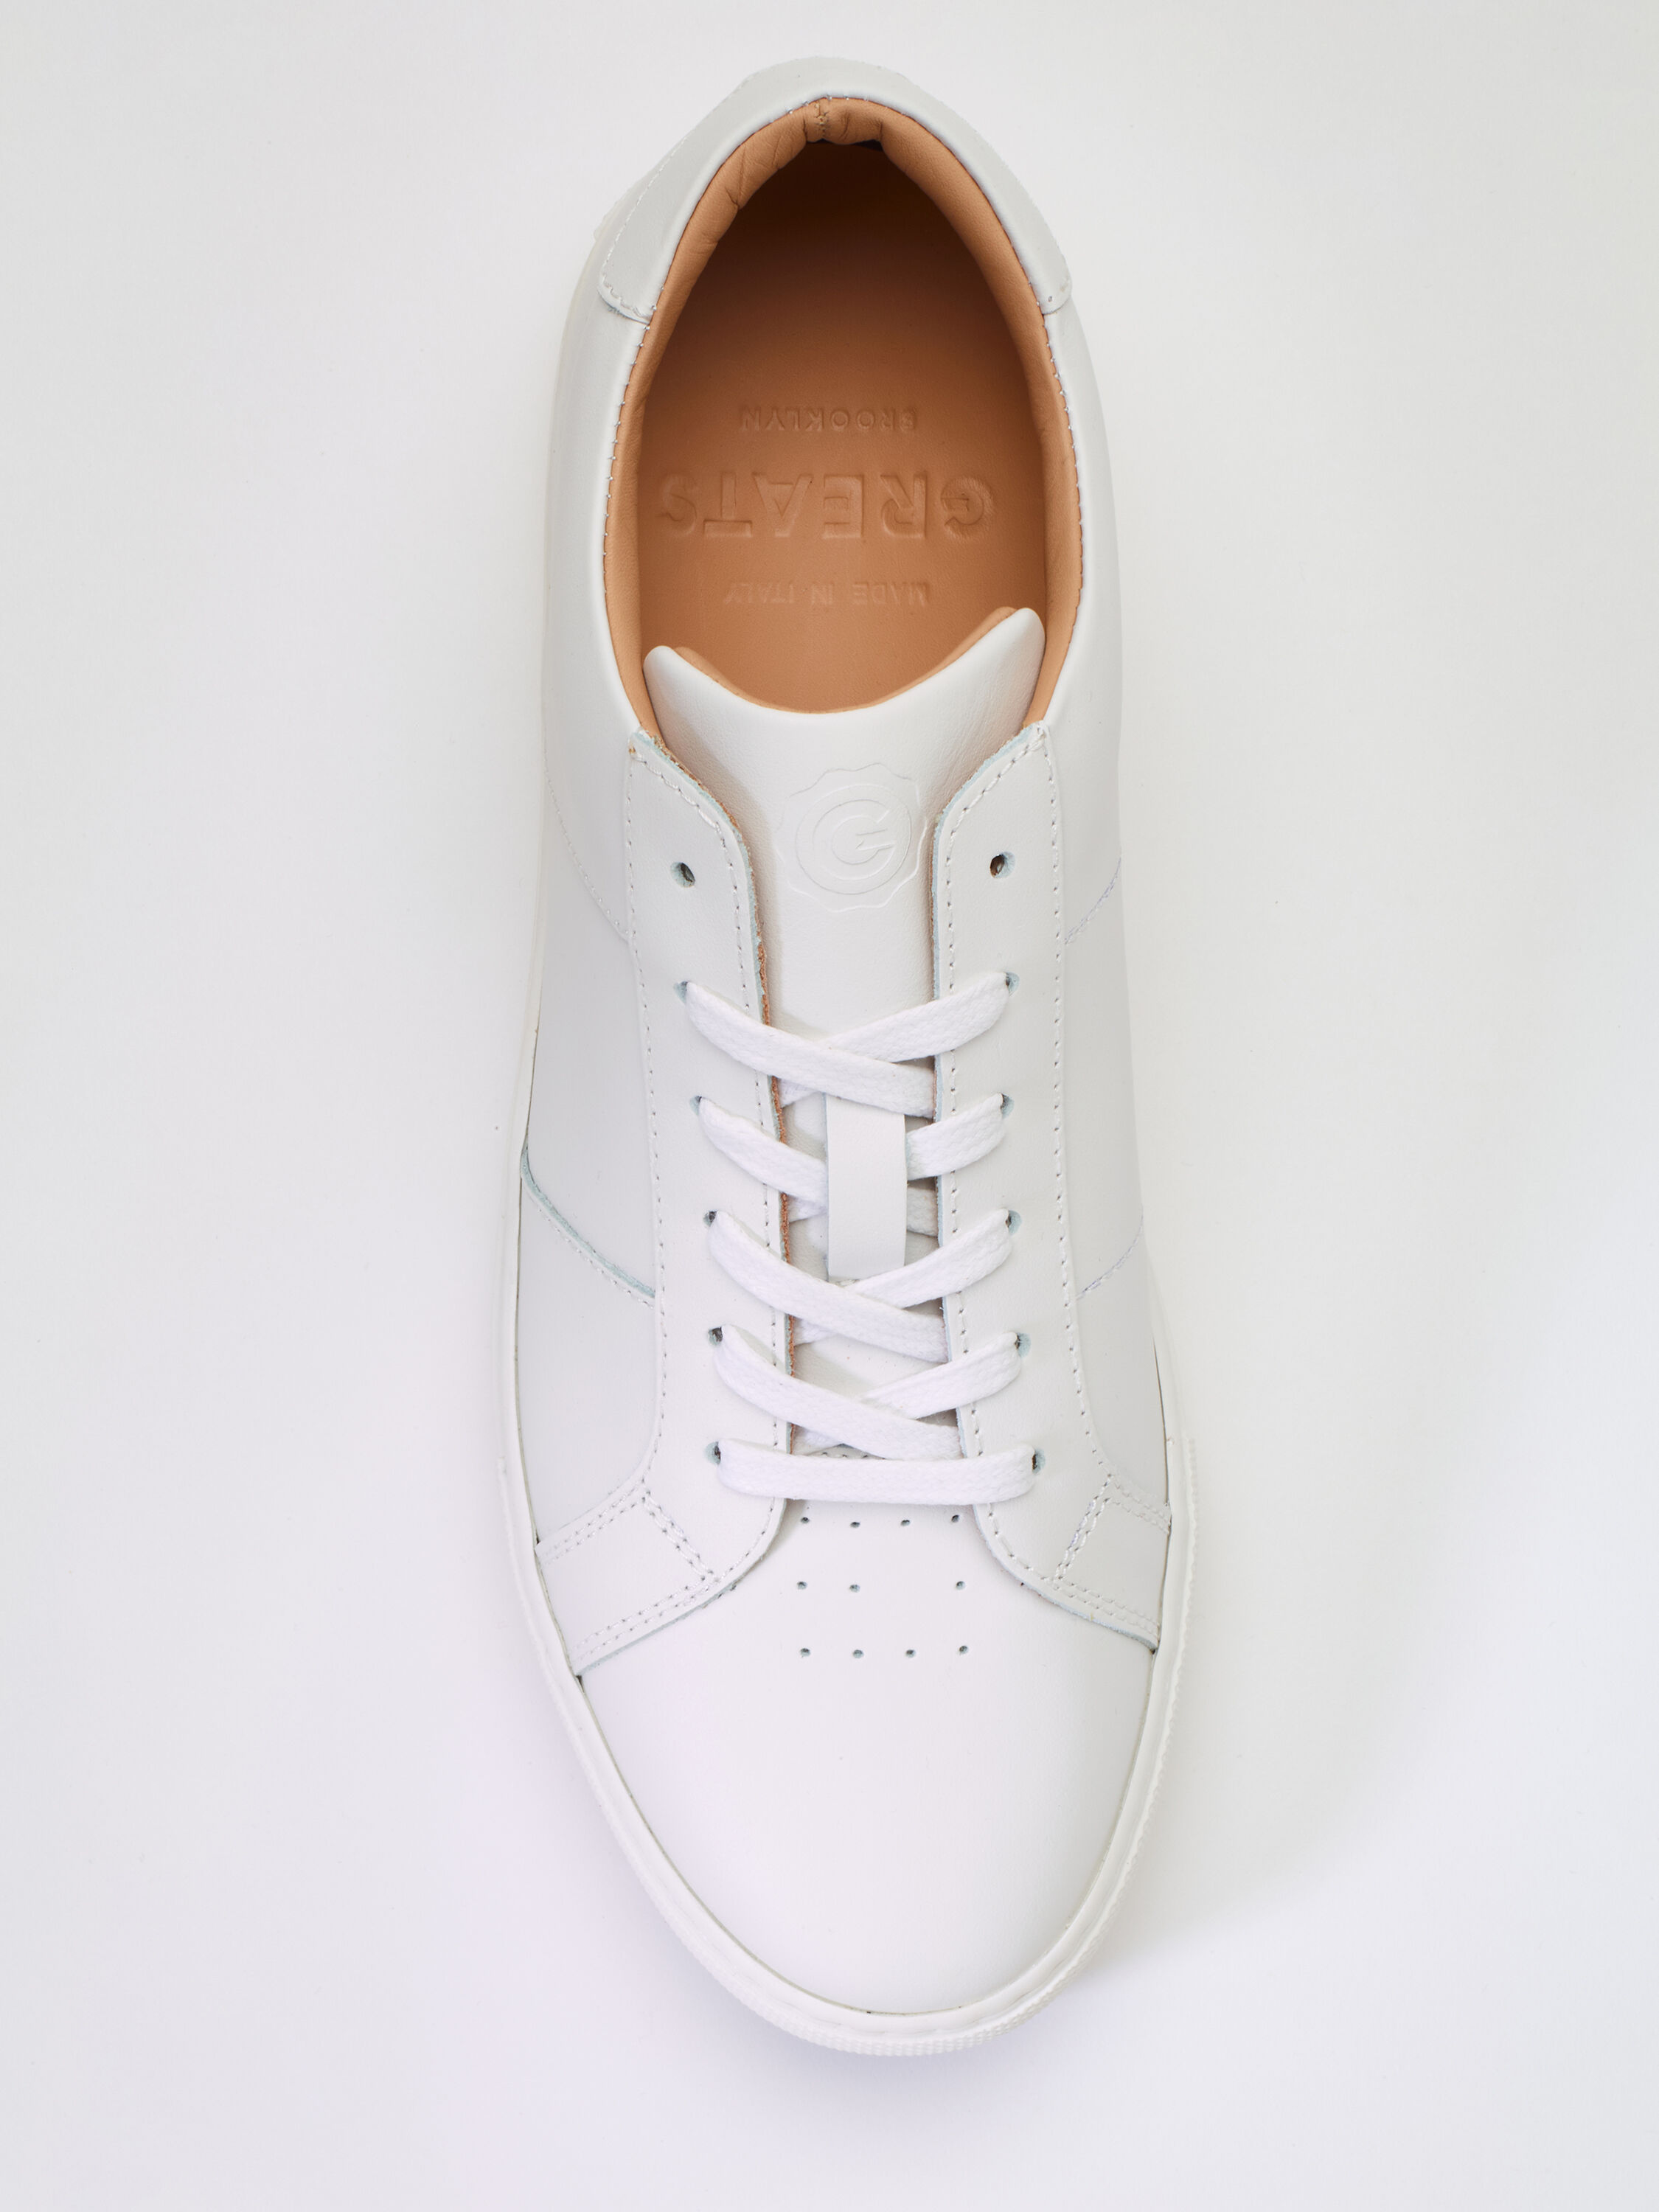 greats leather shoes